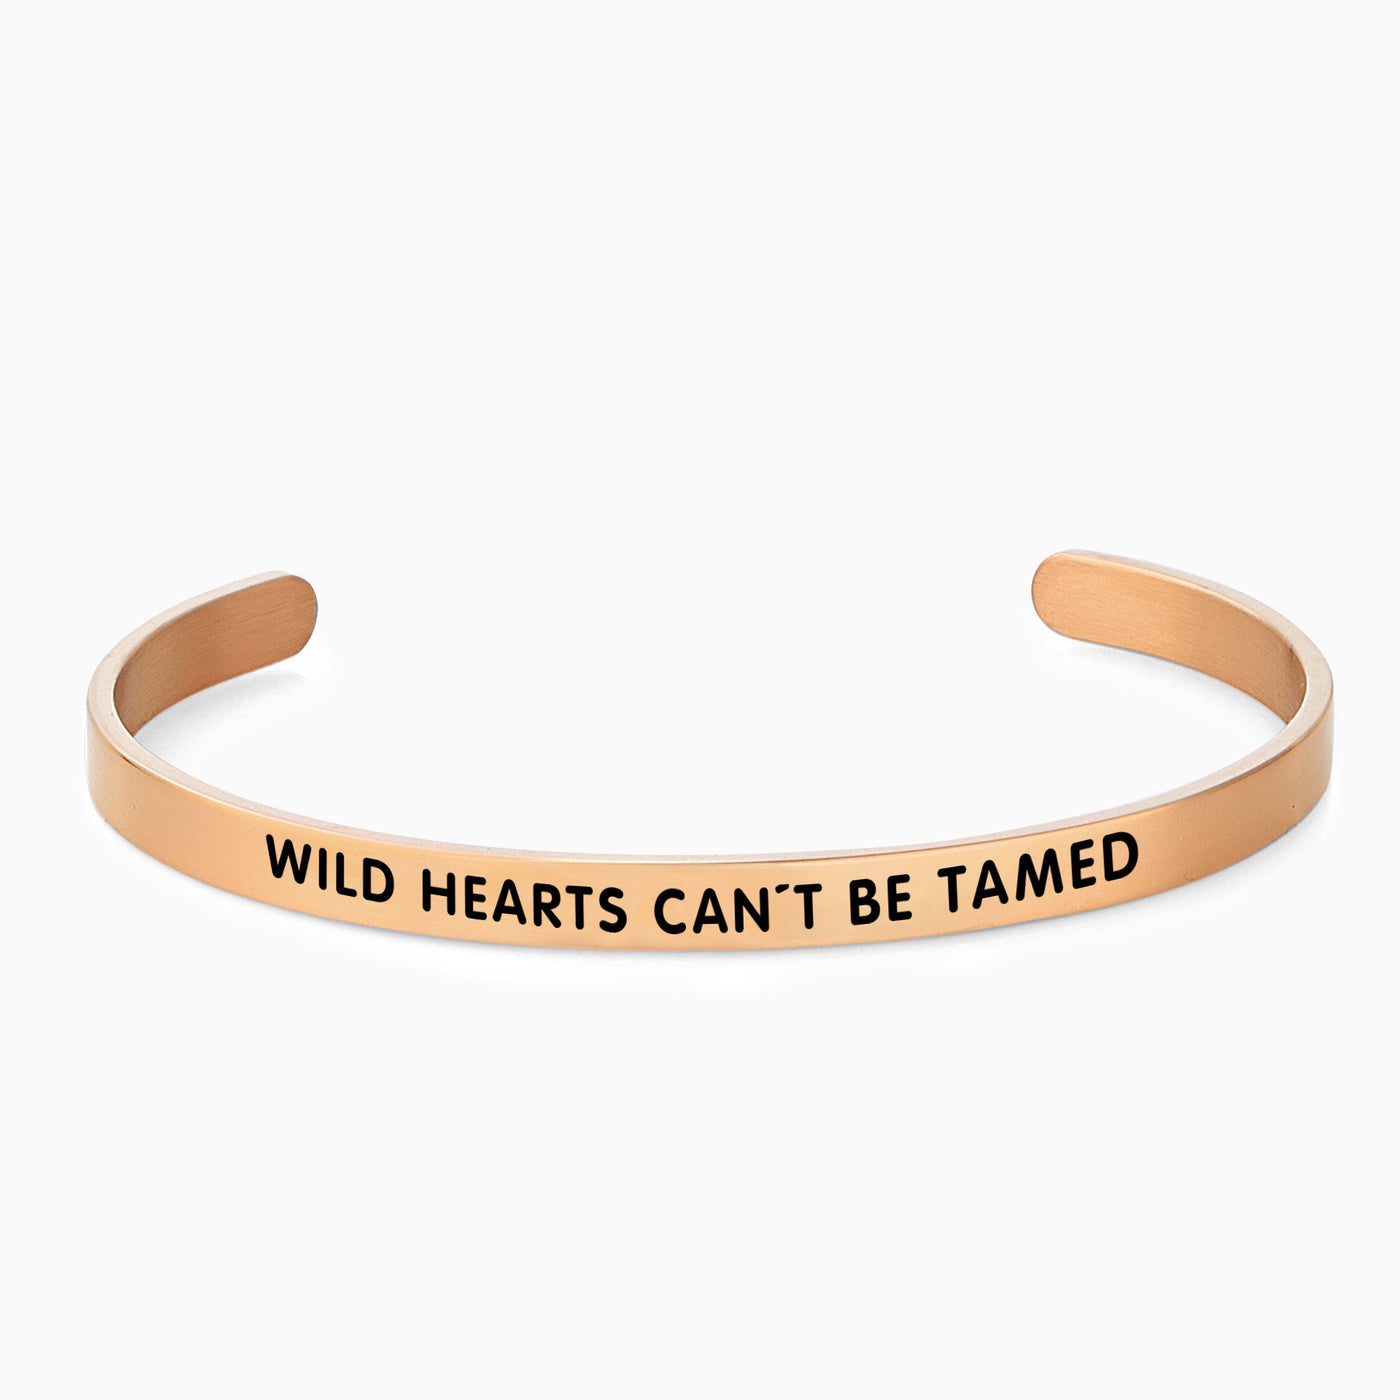 WILD HEARTS CAN'T BE TAMED - OTANTO